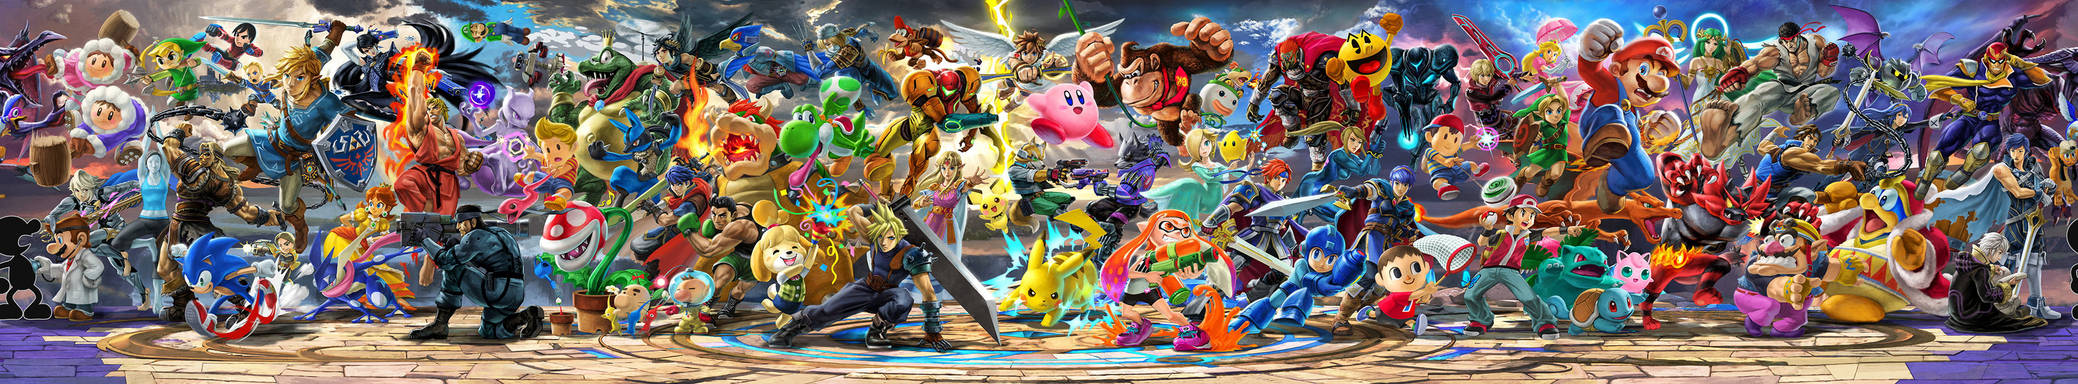 Super Smash Bros. Ultimate OFFICIAL Panoramic Art by Leafpenguins